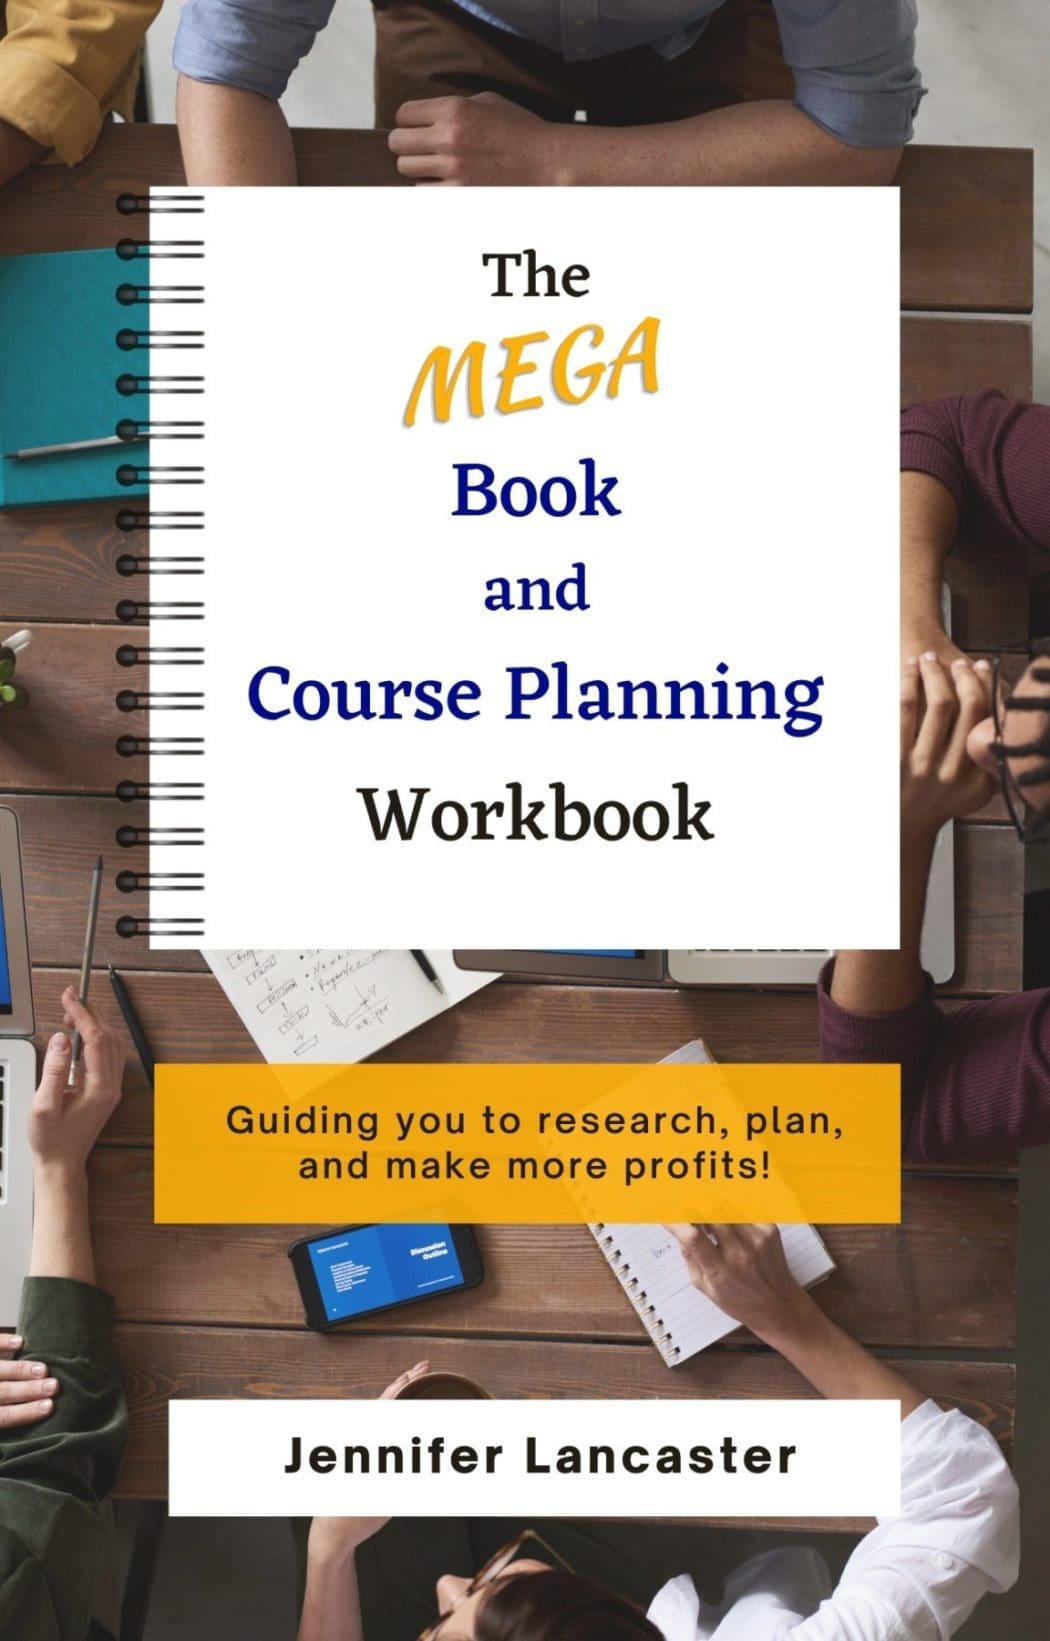 Book and Course Planning workbook